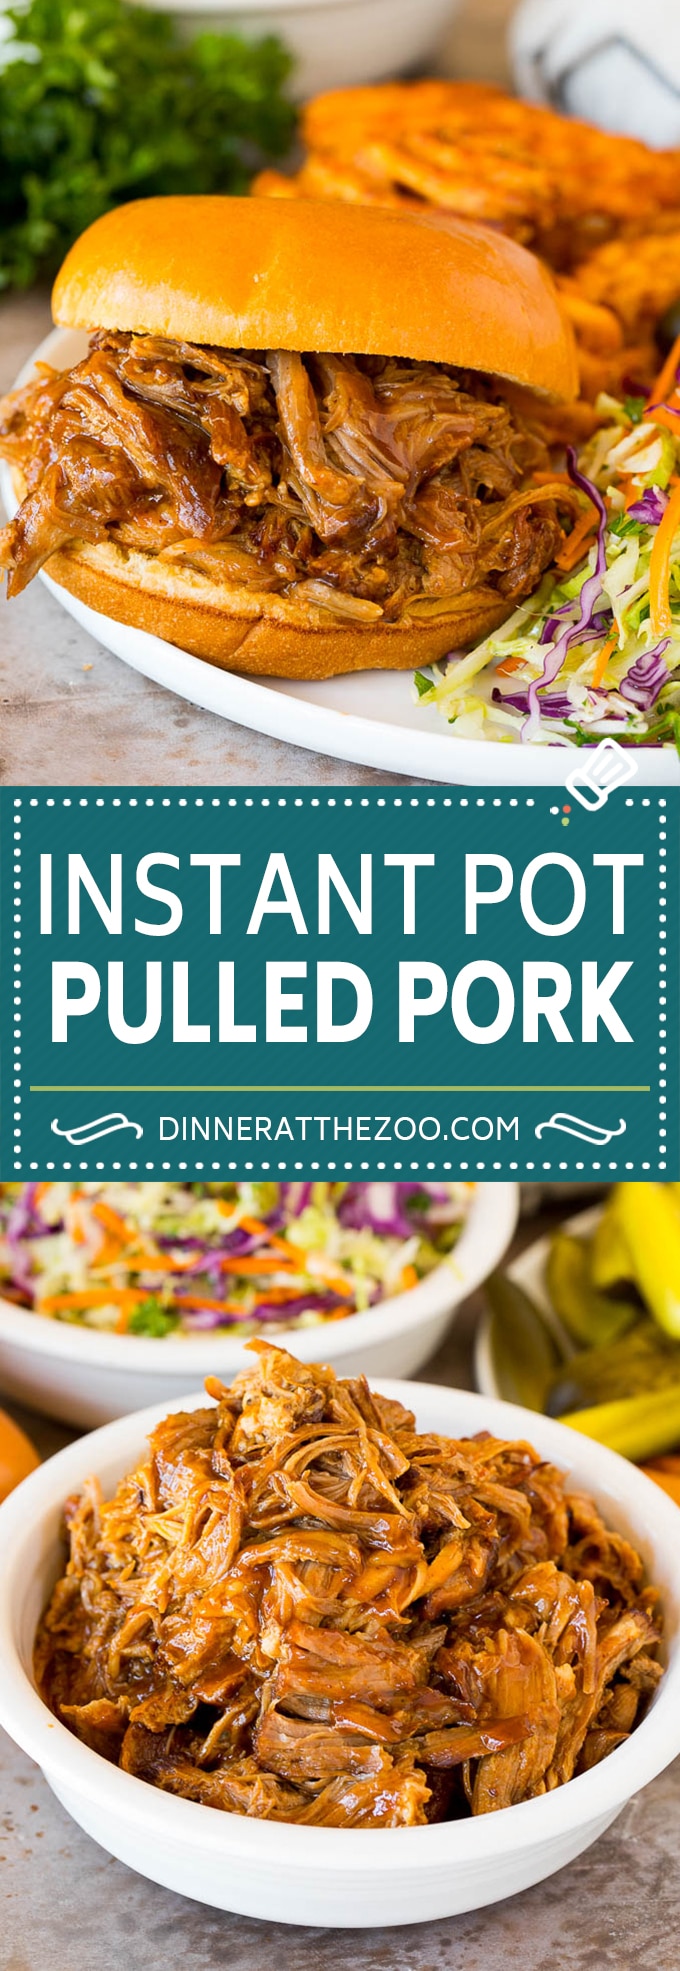 This Instant Pot pulled pork is chunks of meat coated in spices, then pressure cooked to tender and juicy perfection.